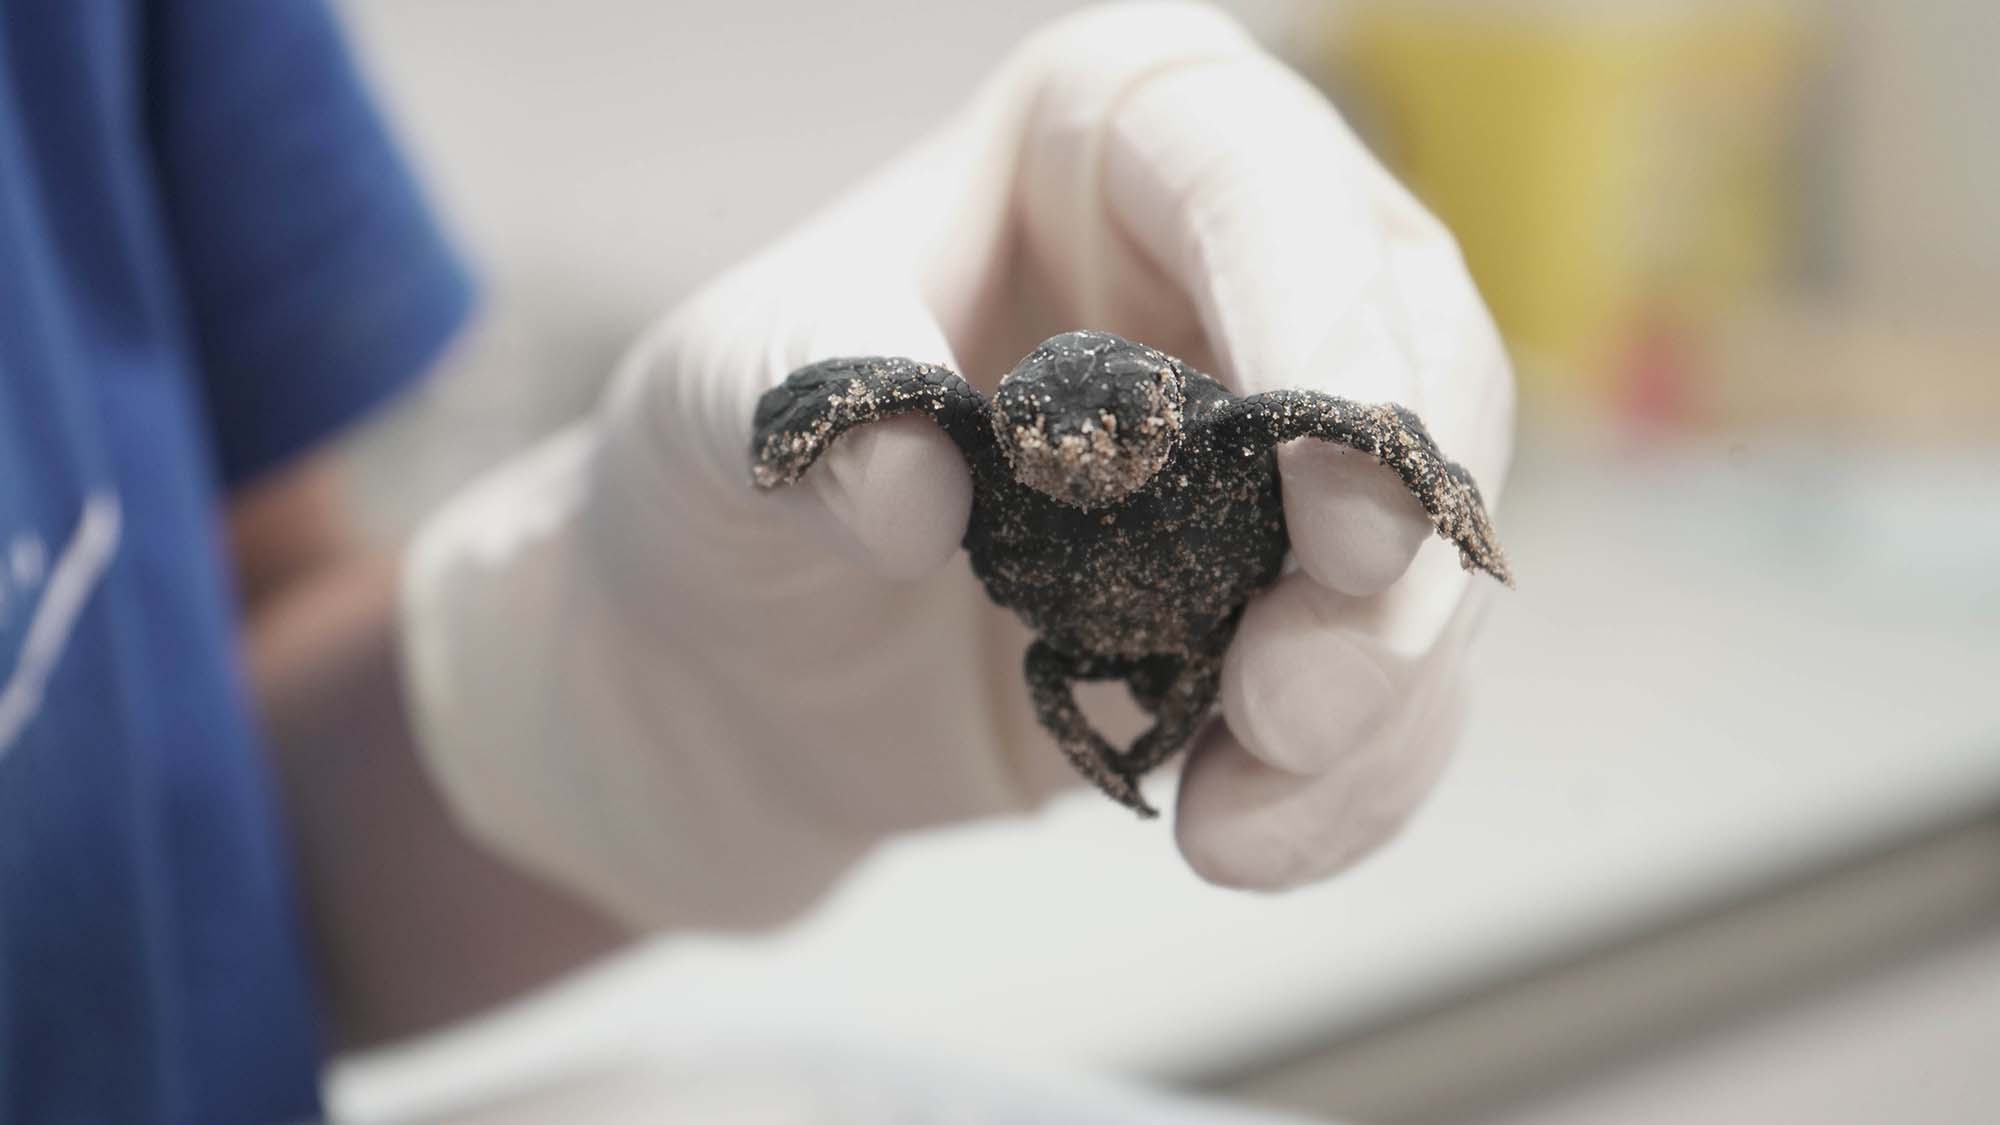 Read more about the article The Only Viable Recorded Loggerhead Sea Turtle Egg Laid This Year In Spain Hatches At Oceanarium